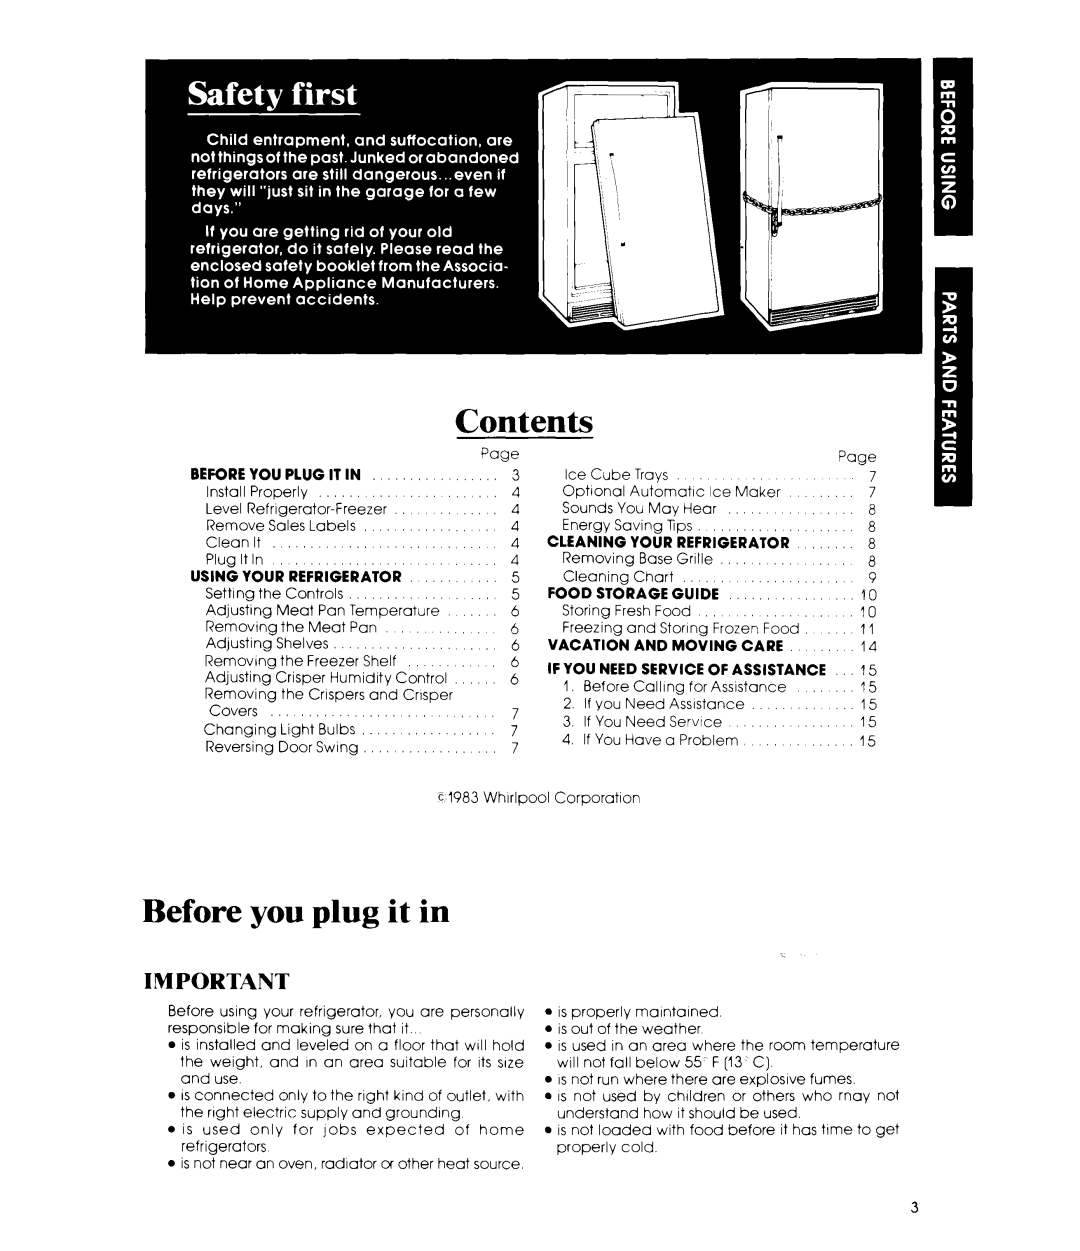 Whirlpool ET22MK manual Contents, Before you plug it in 